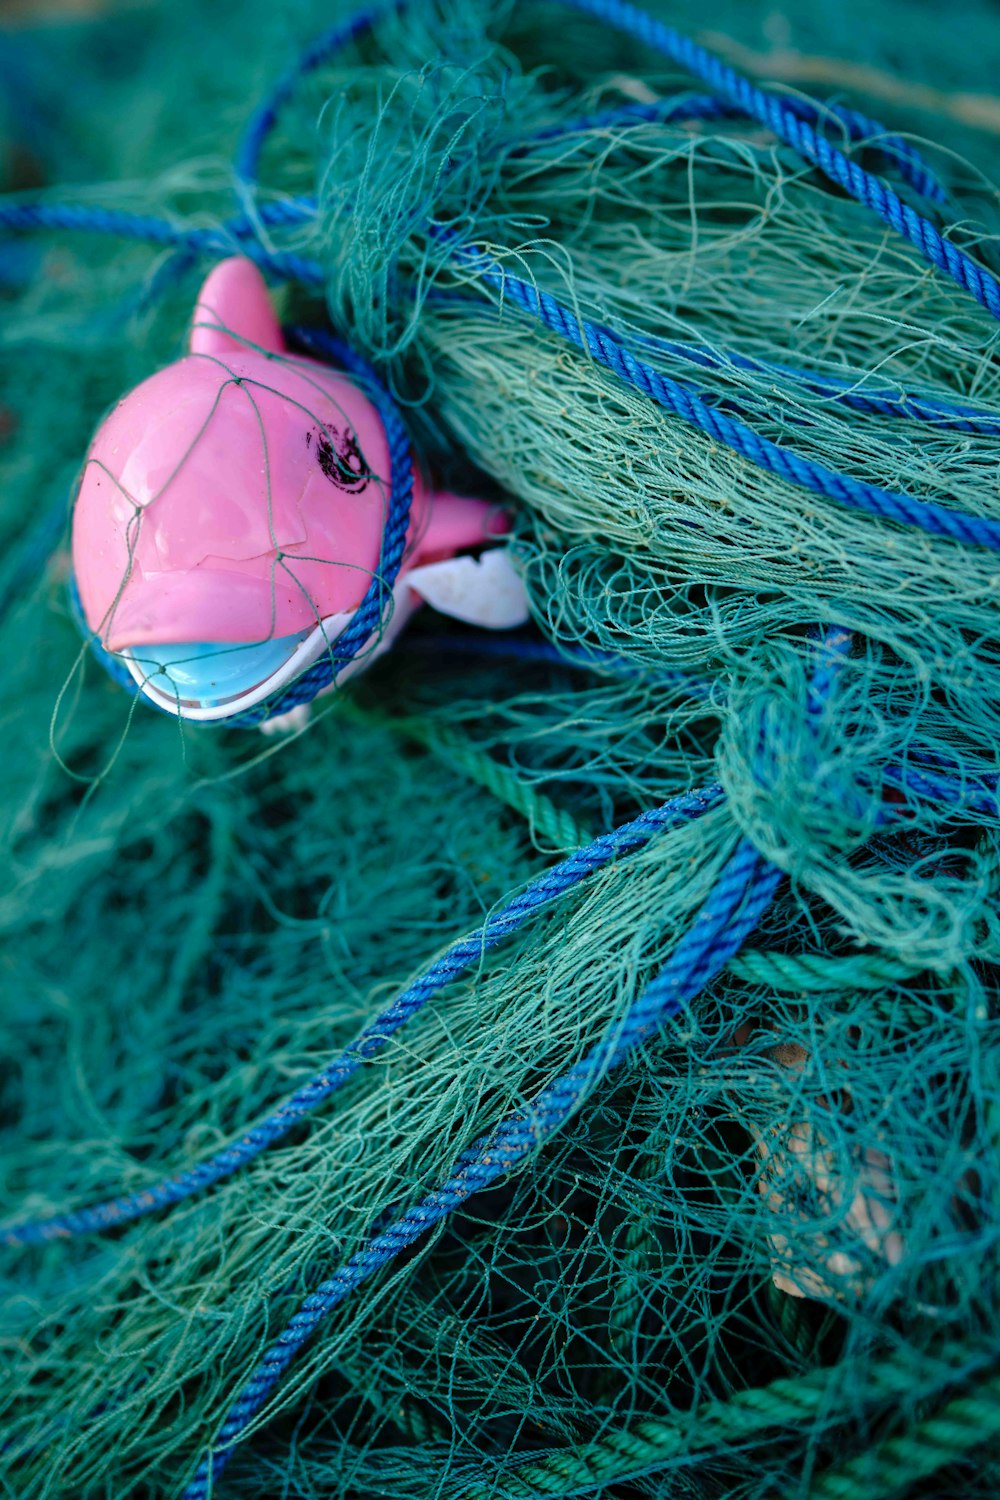 A pink toy in a green fishing net photo – Free Sri lanka Image on